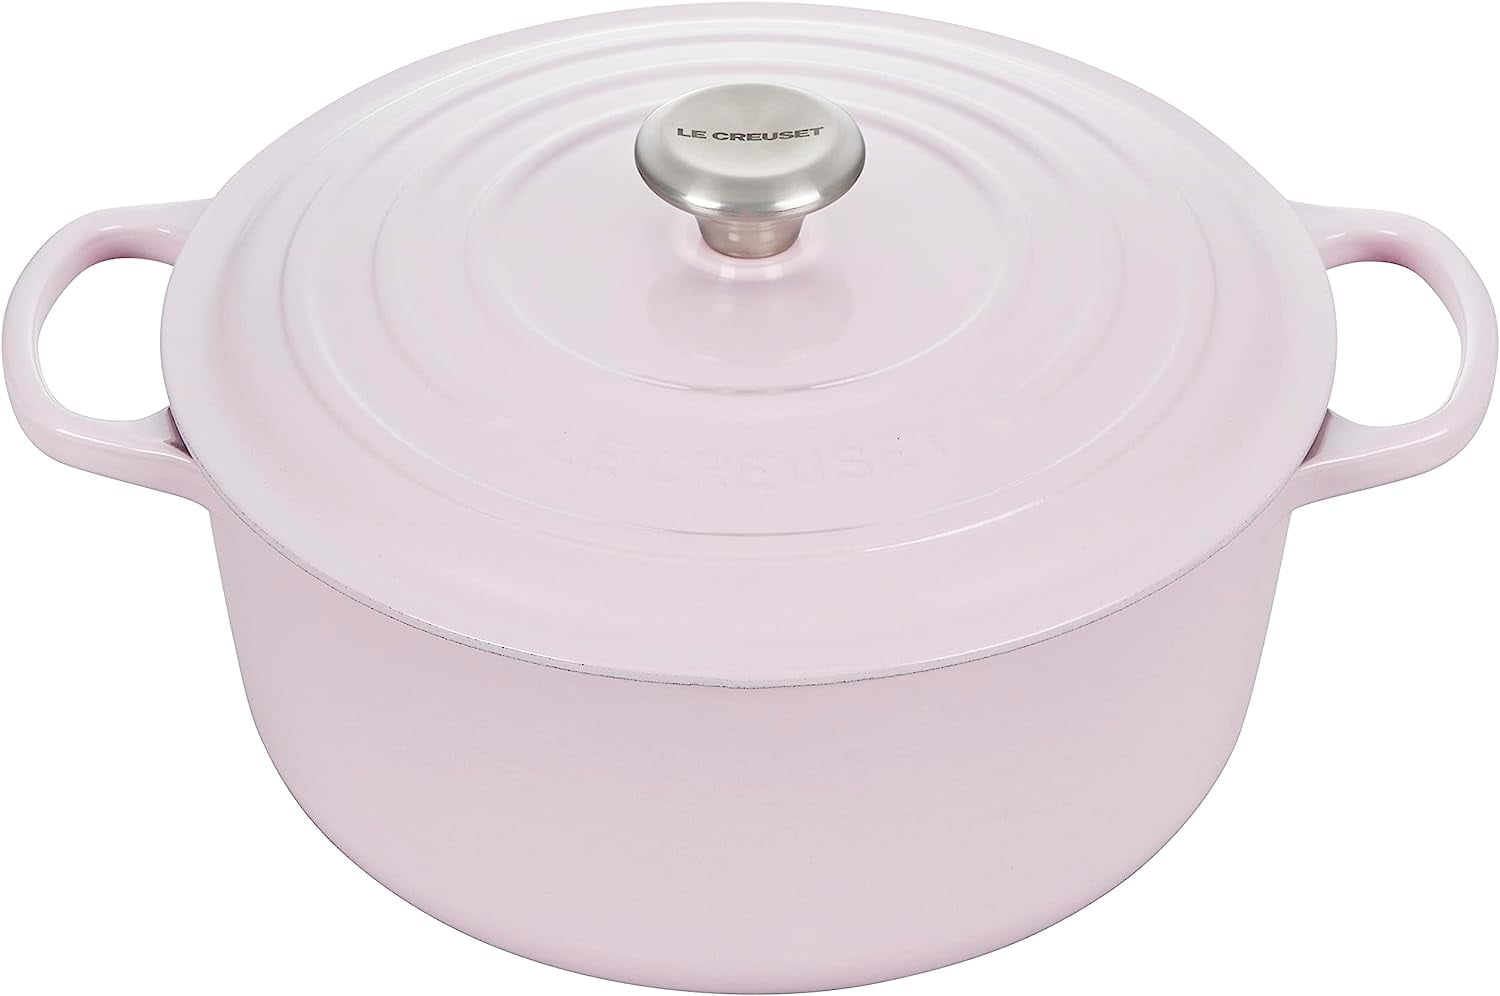 Le Creuset Enameled Cast Iron Signature Round Dutch Oven with Lid, 5.5 ...